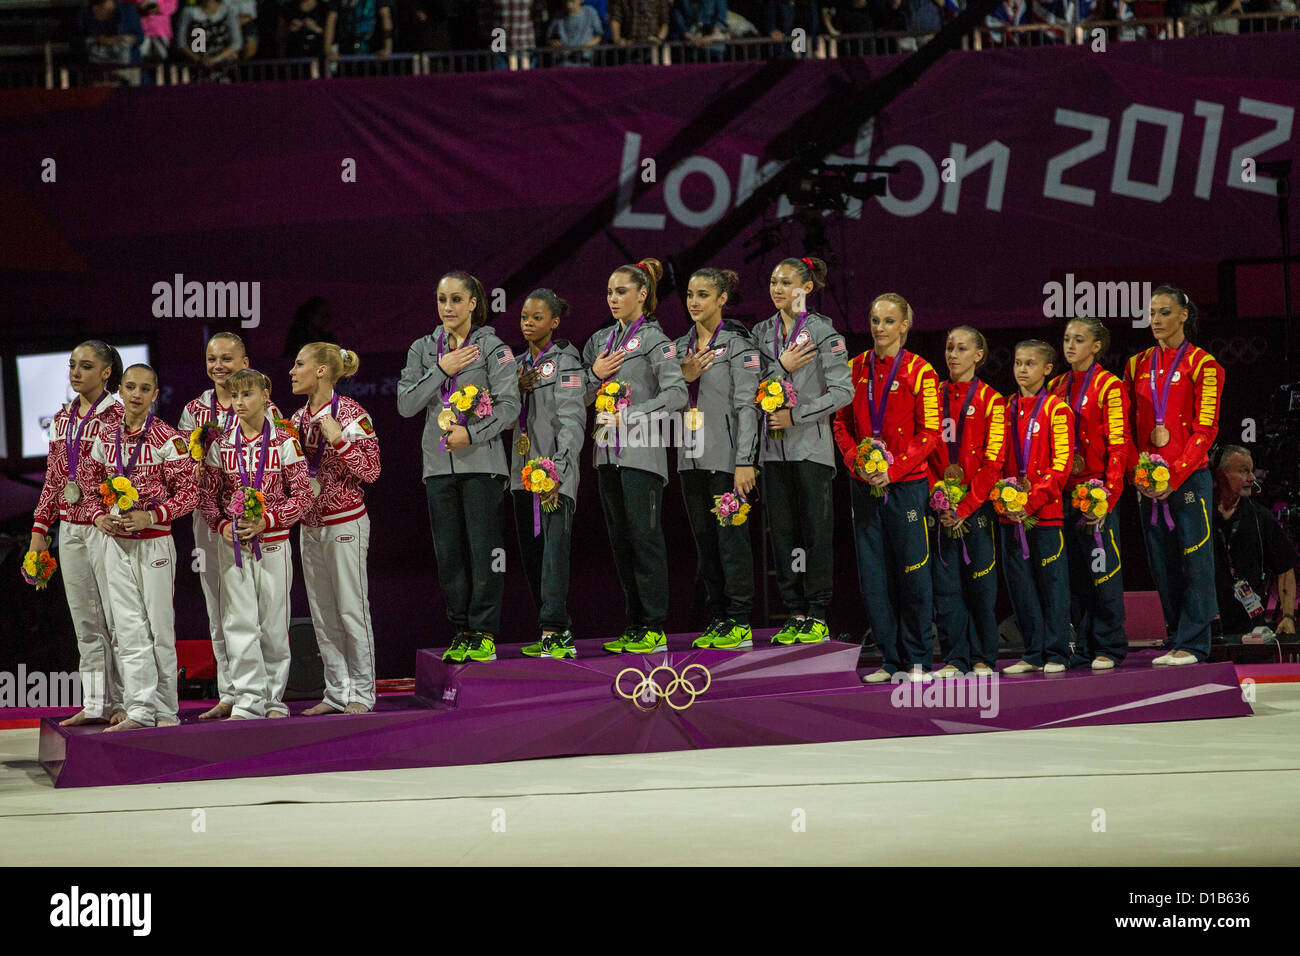 Women's Team Gymnastics medalist on the podium at the Olympic Summer Games, London 2012 Stock Photo